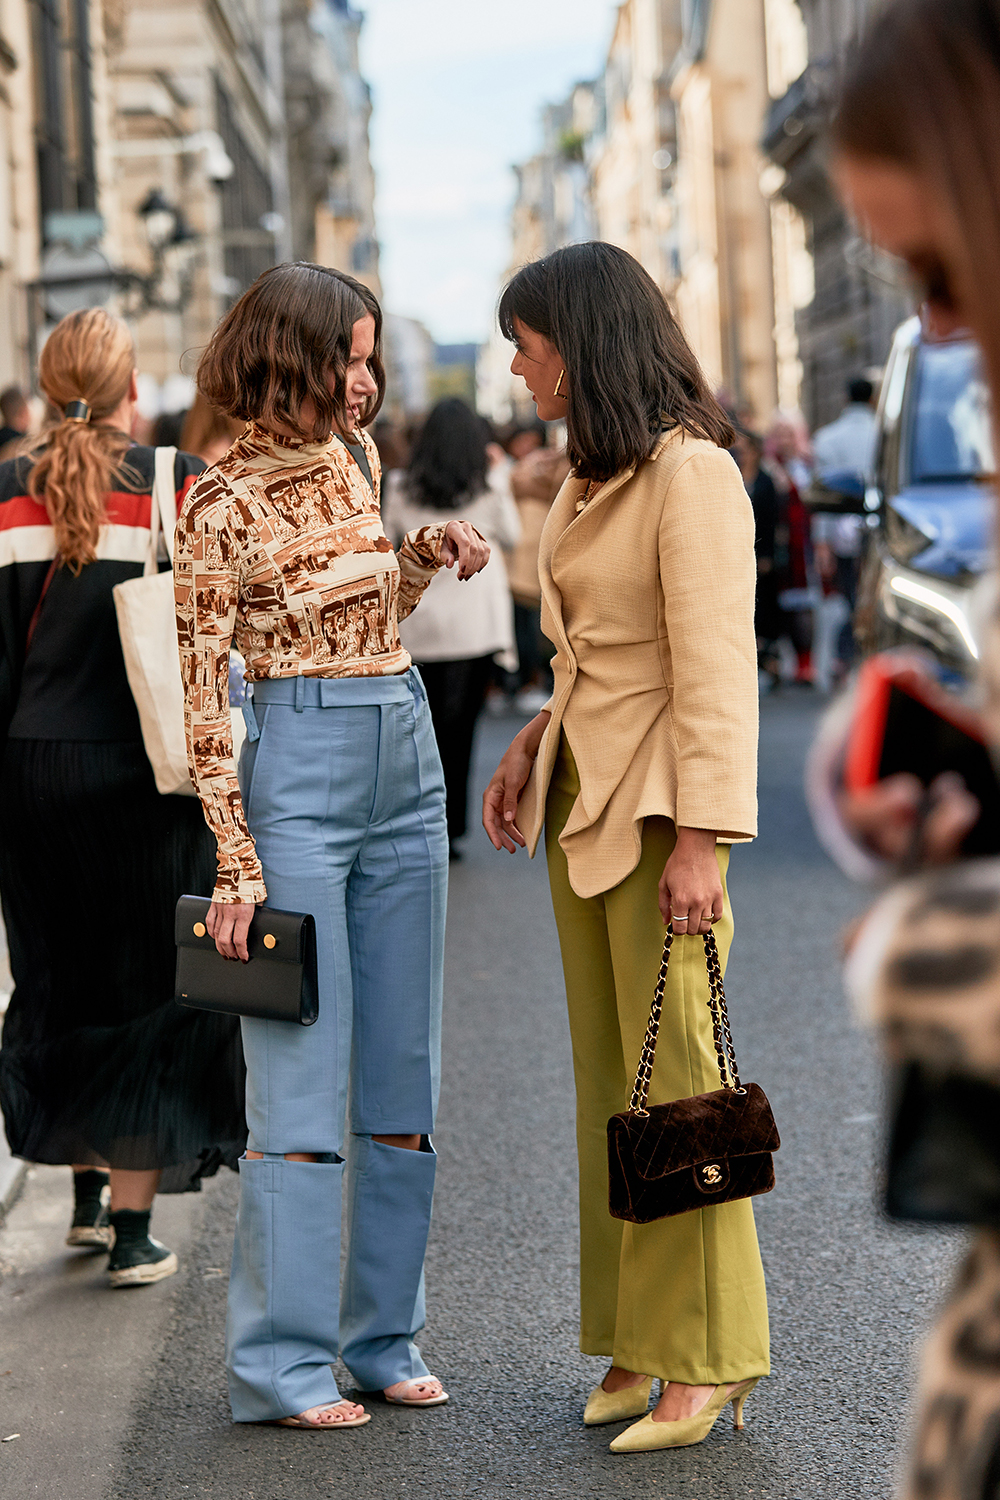 The Latest Street Style From Paris Fashion Week | Who What Wear